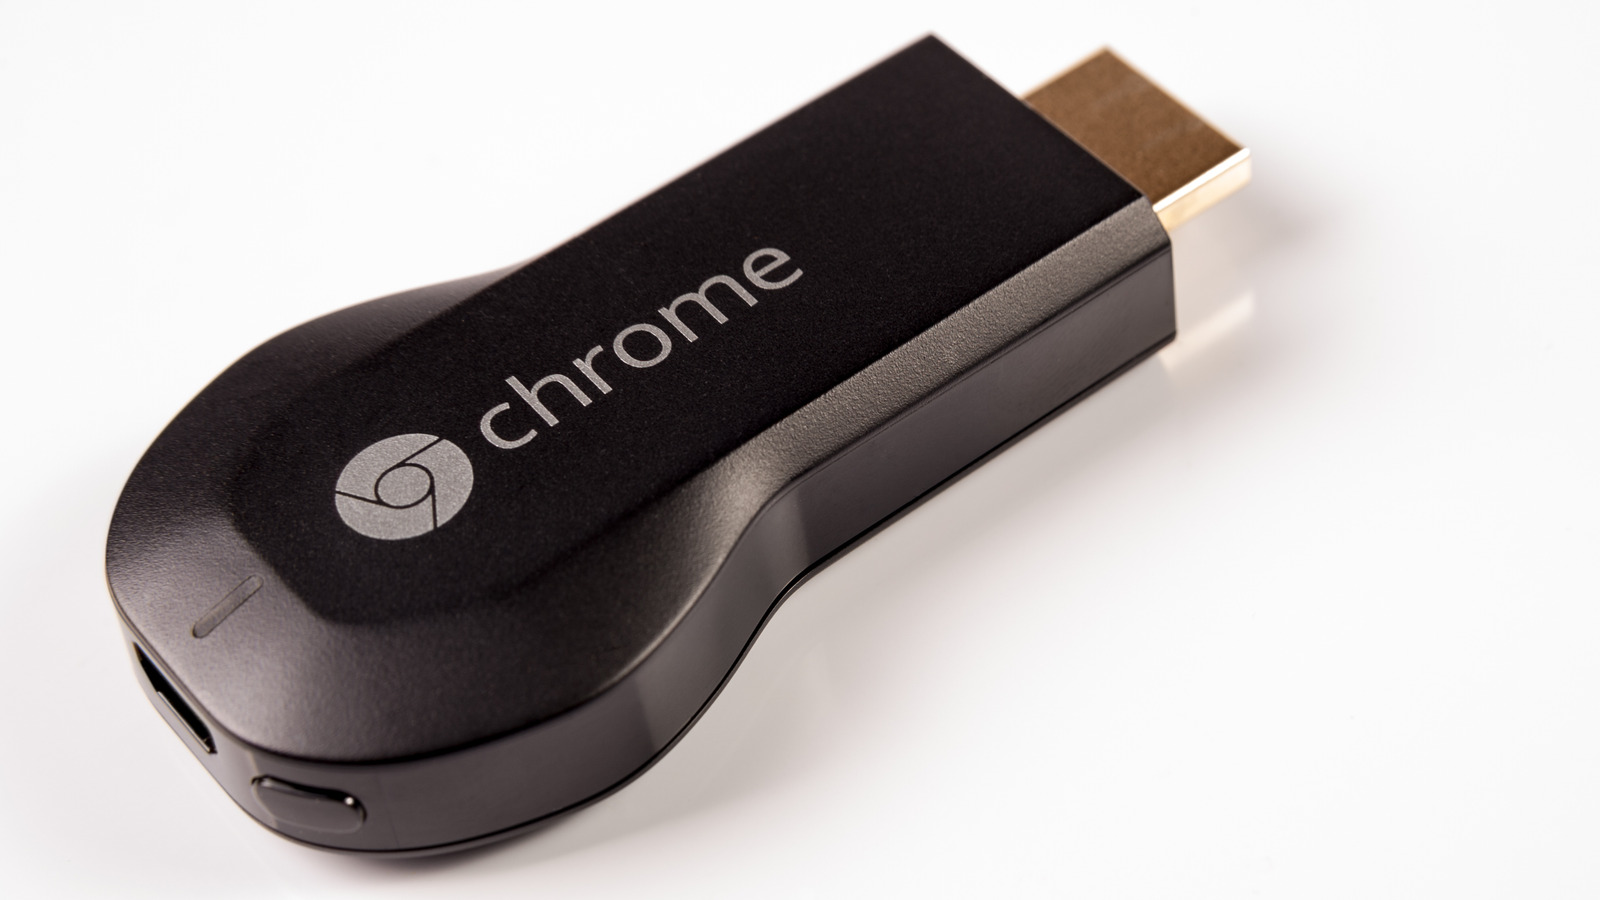 Google Ended First-Gen Chromecast Support No One Noticed